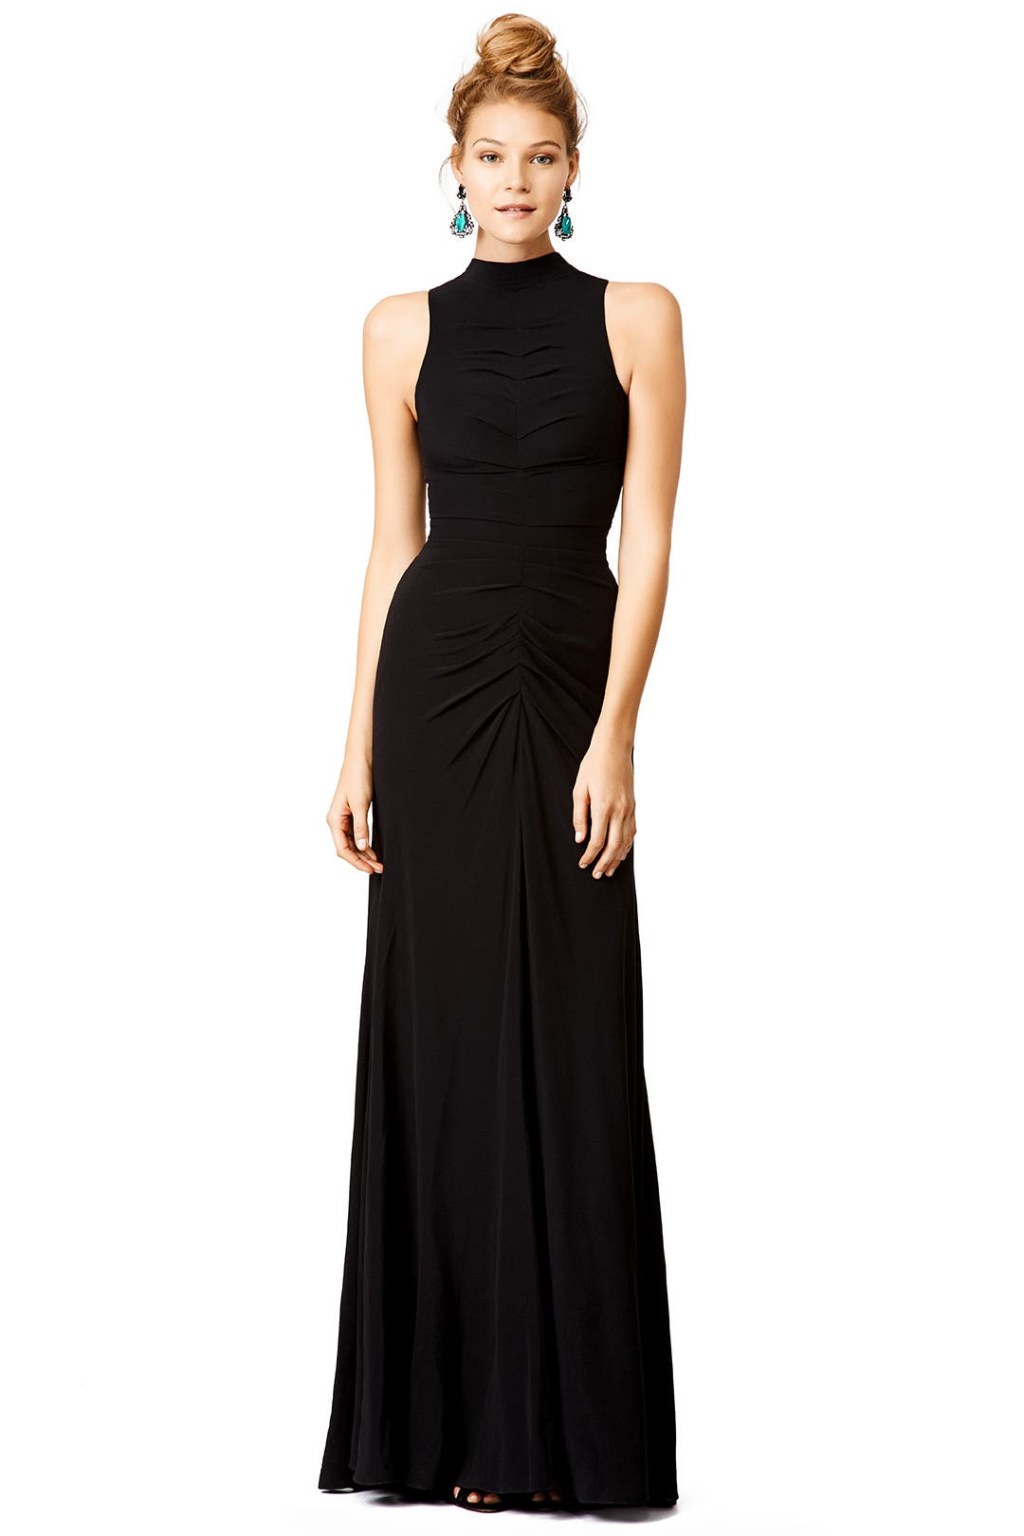 Picture of: After the Wave Gown by Vera Wang for $  Rent the Runway